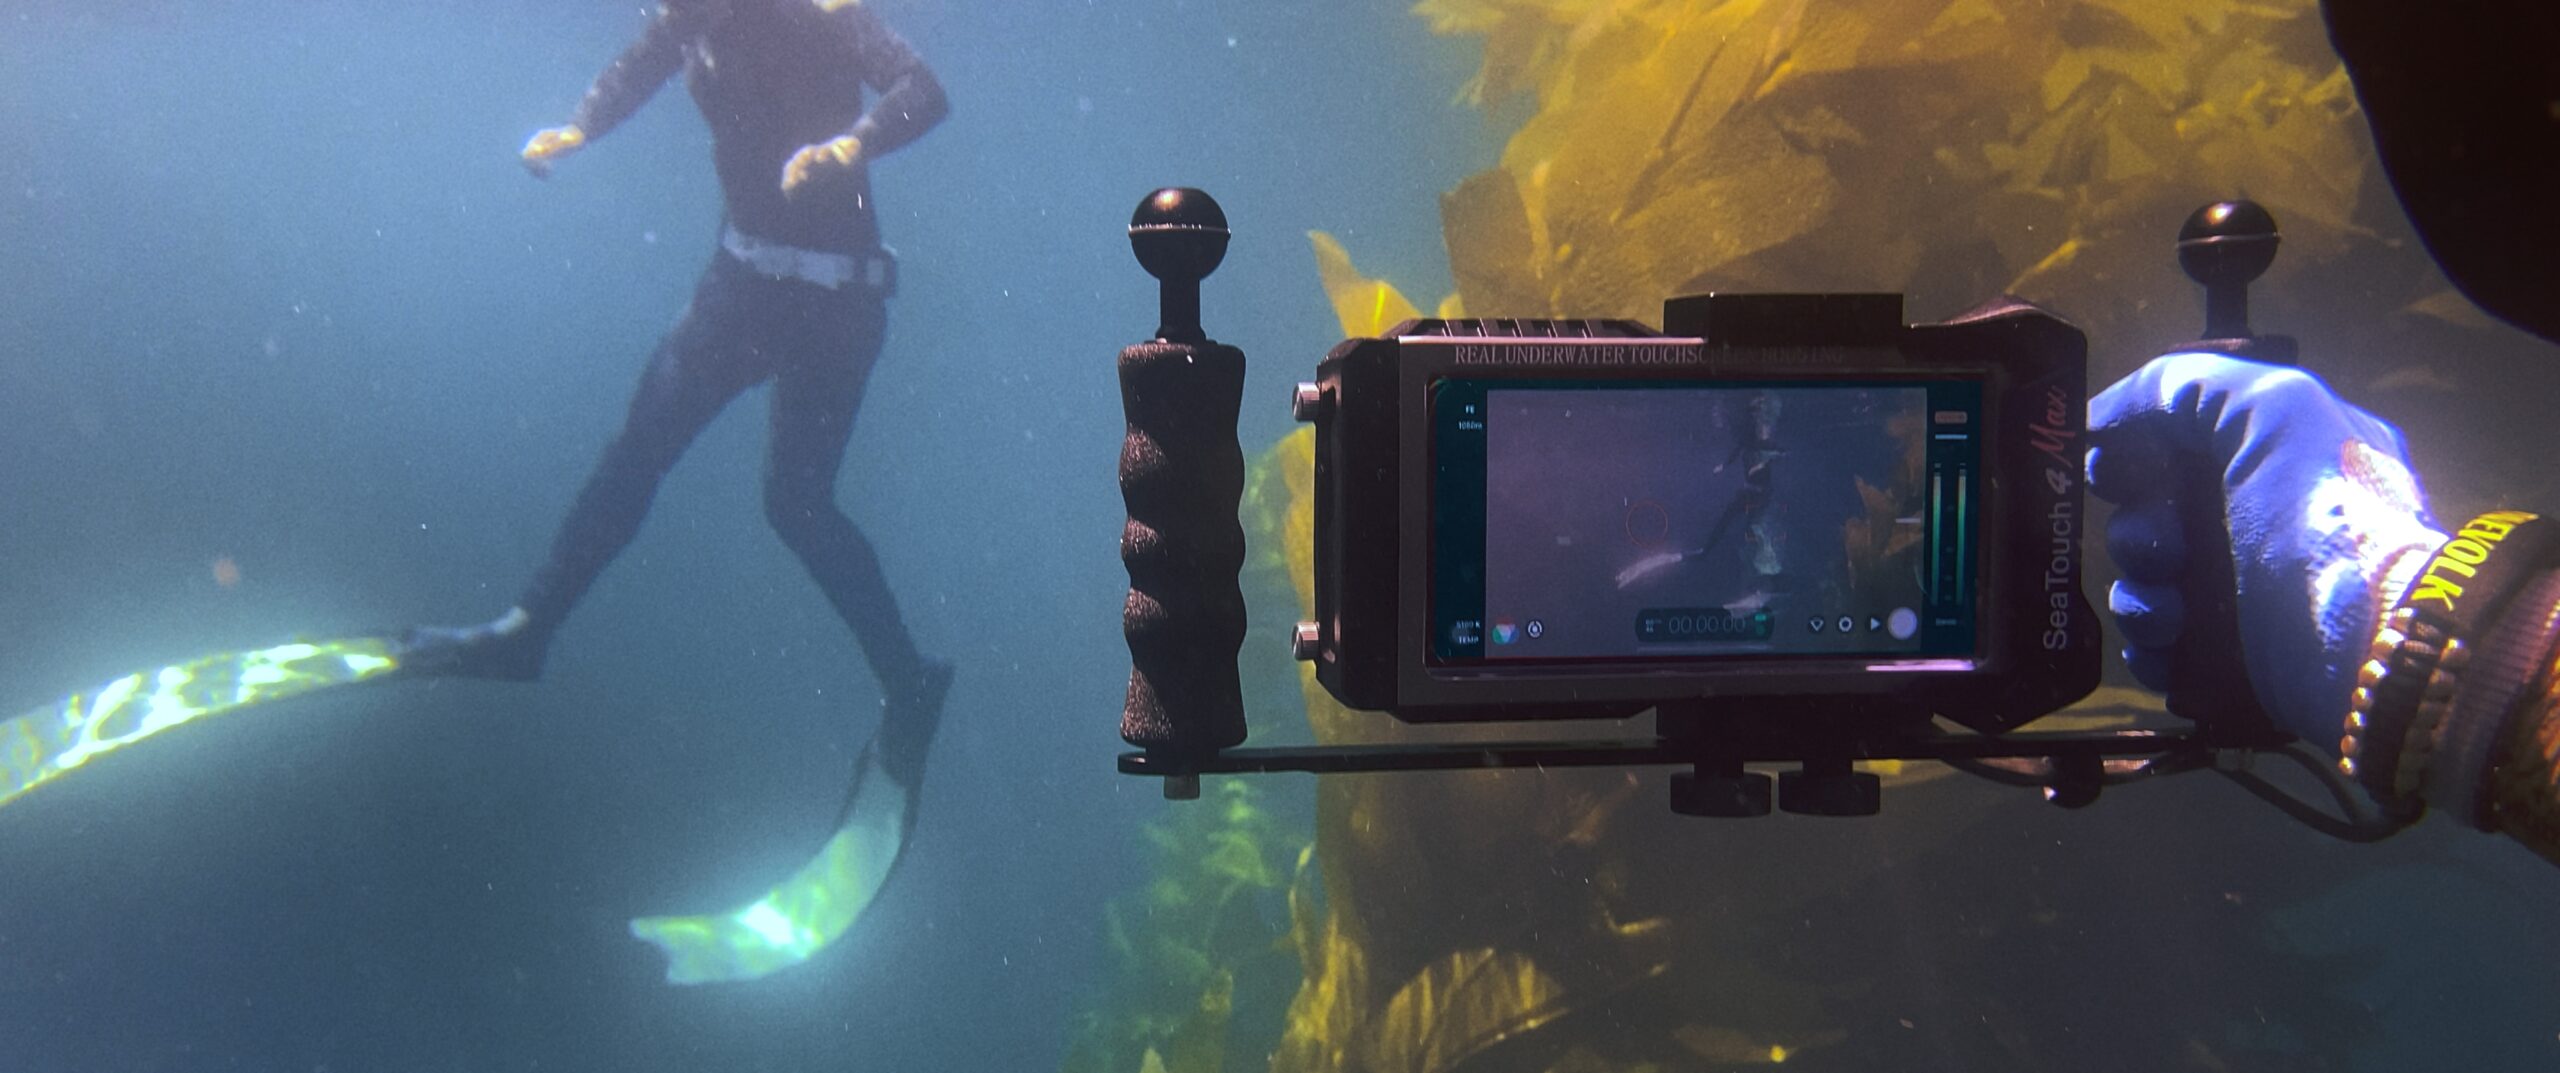 Underwater videography featuring Filmic Pro